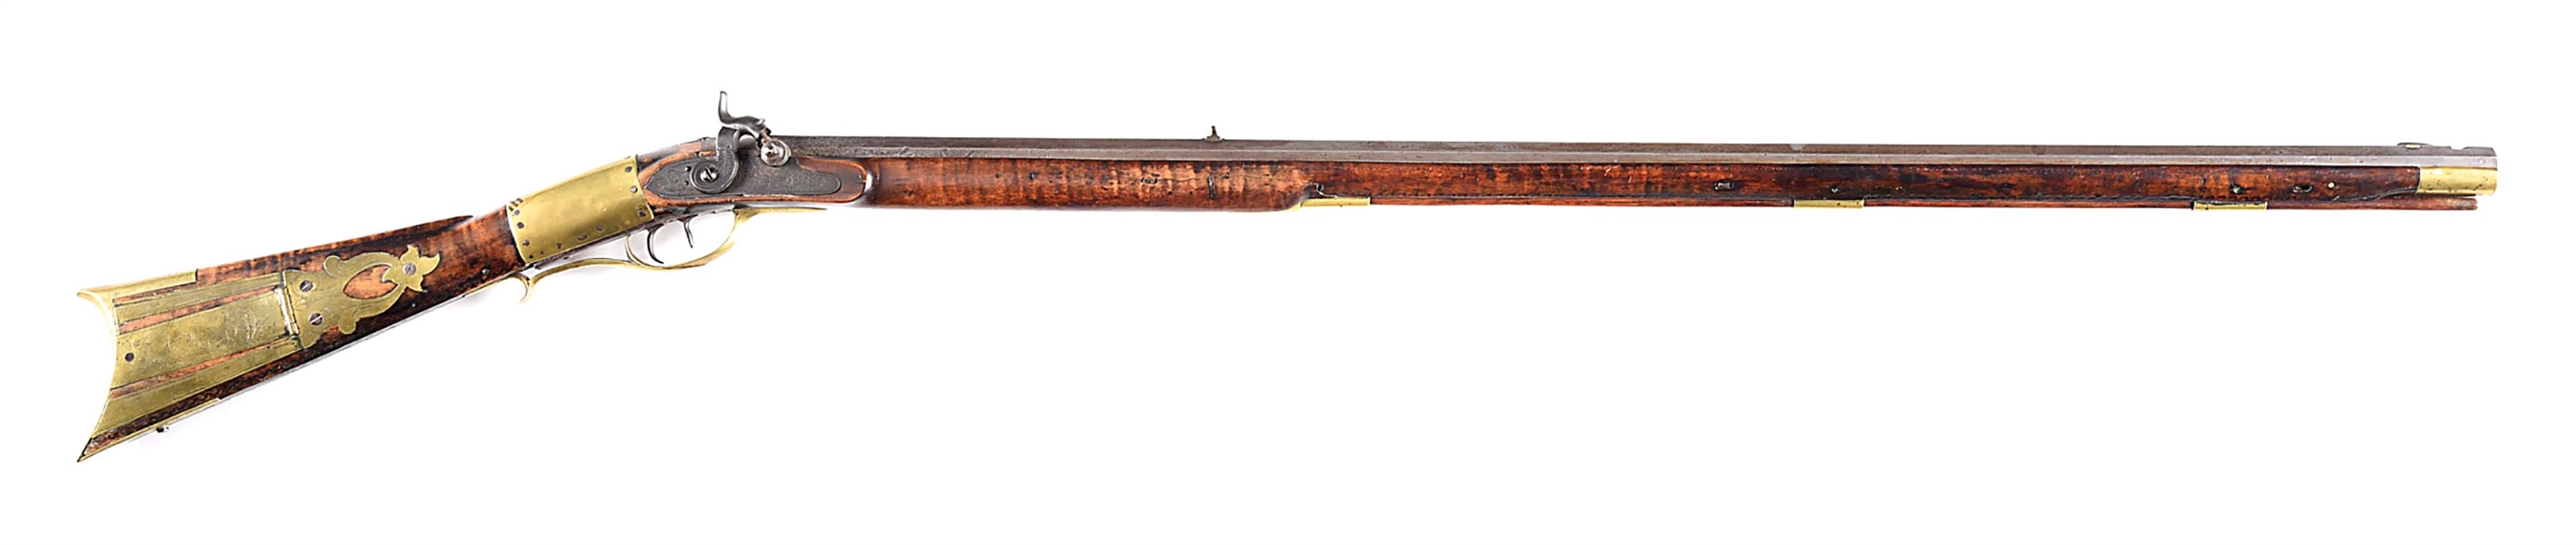 (A) PERCUSSION KENTUCKY RIFLE STAMPED A.S. JOY.